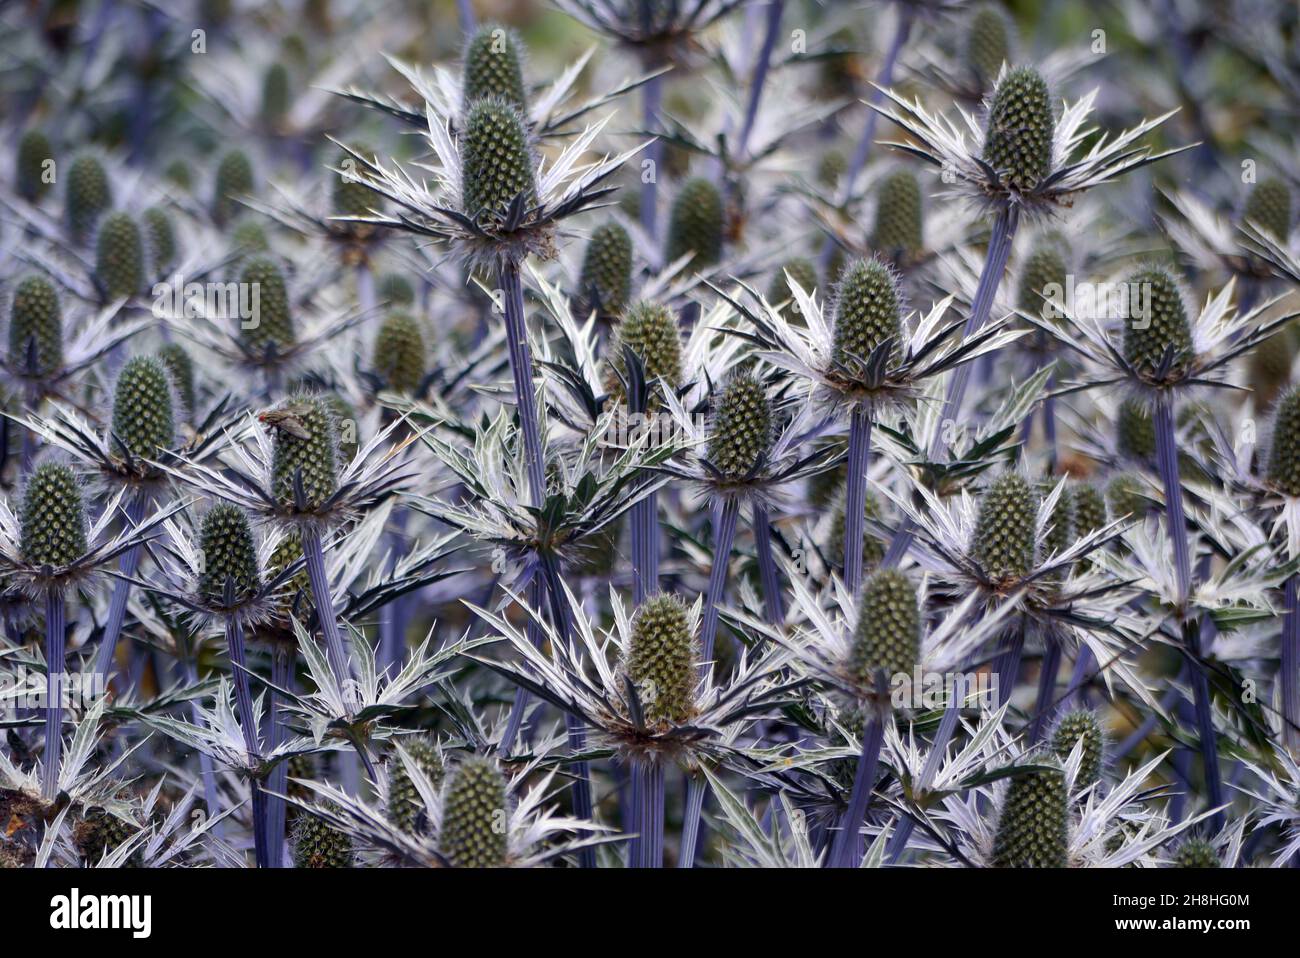 Clump of Eryngium Amethystinum (Amethyst Sea Holly) Thistles Grown in the Borders at Newby Hall & Gardens, Ripon, North Yorkshire, England, UK. Stock Photo